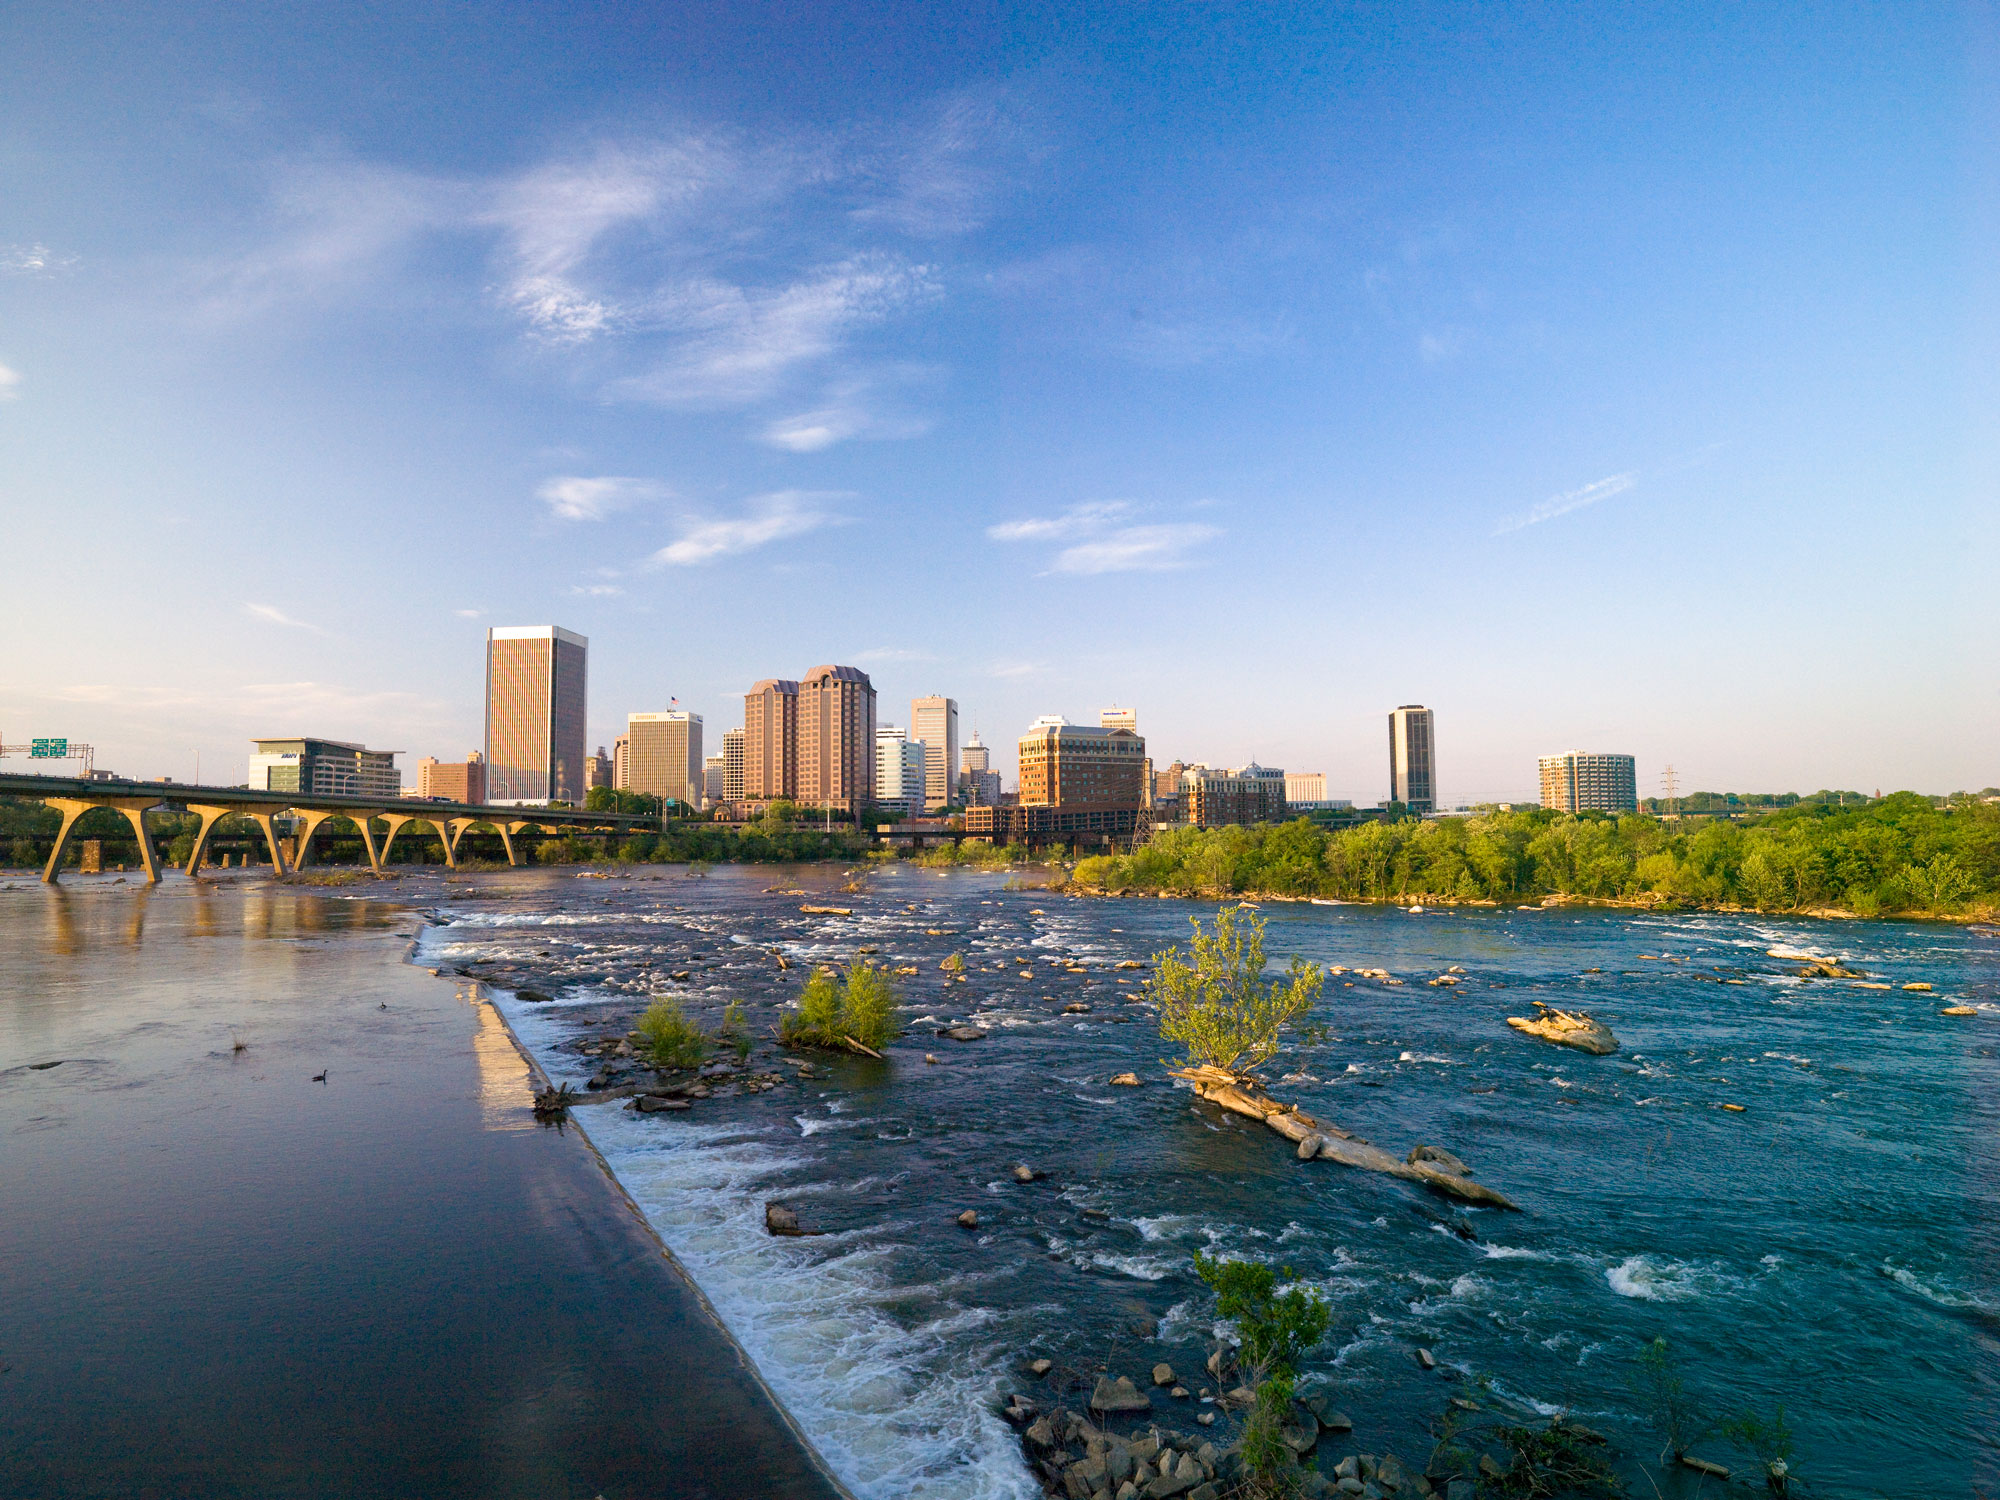 Photograph of Richmond city and the James River.